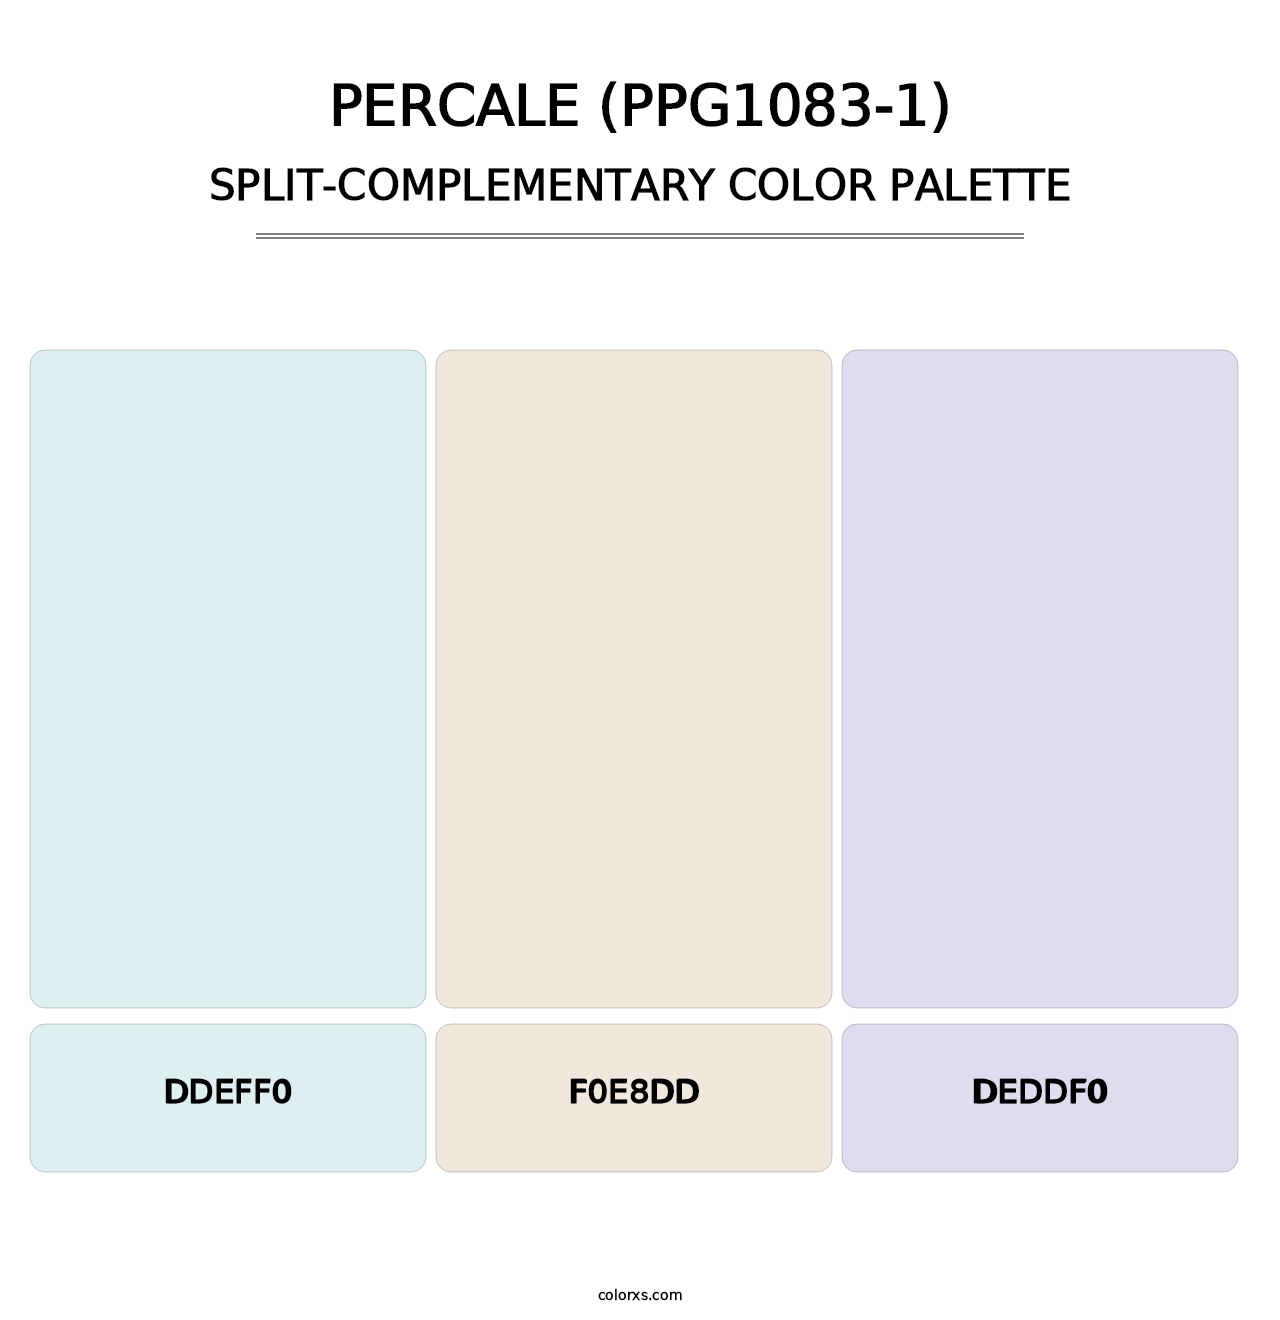 Percale (PPG1083-1) - Split-Complementary Color Palette